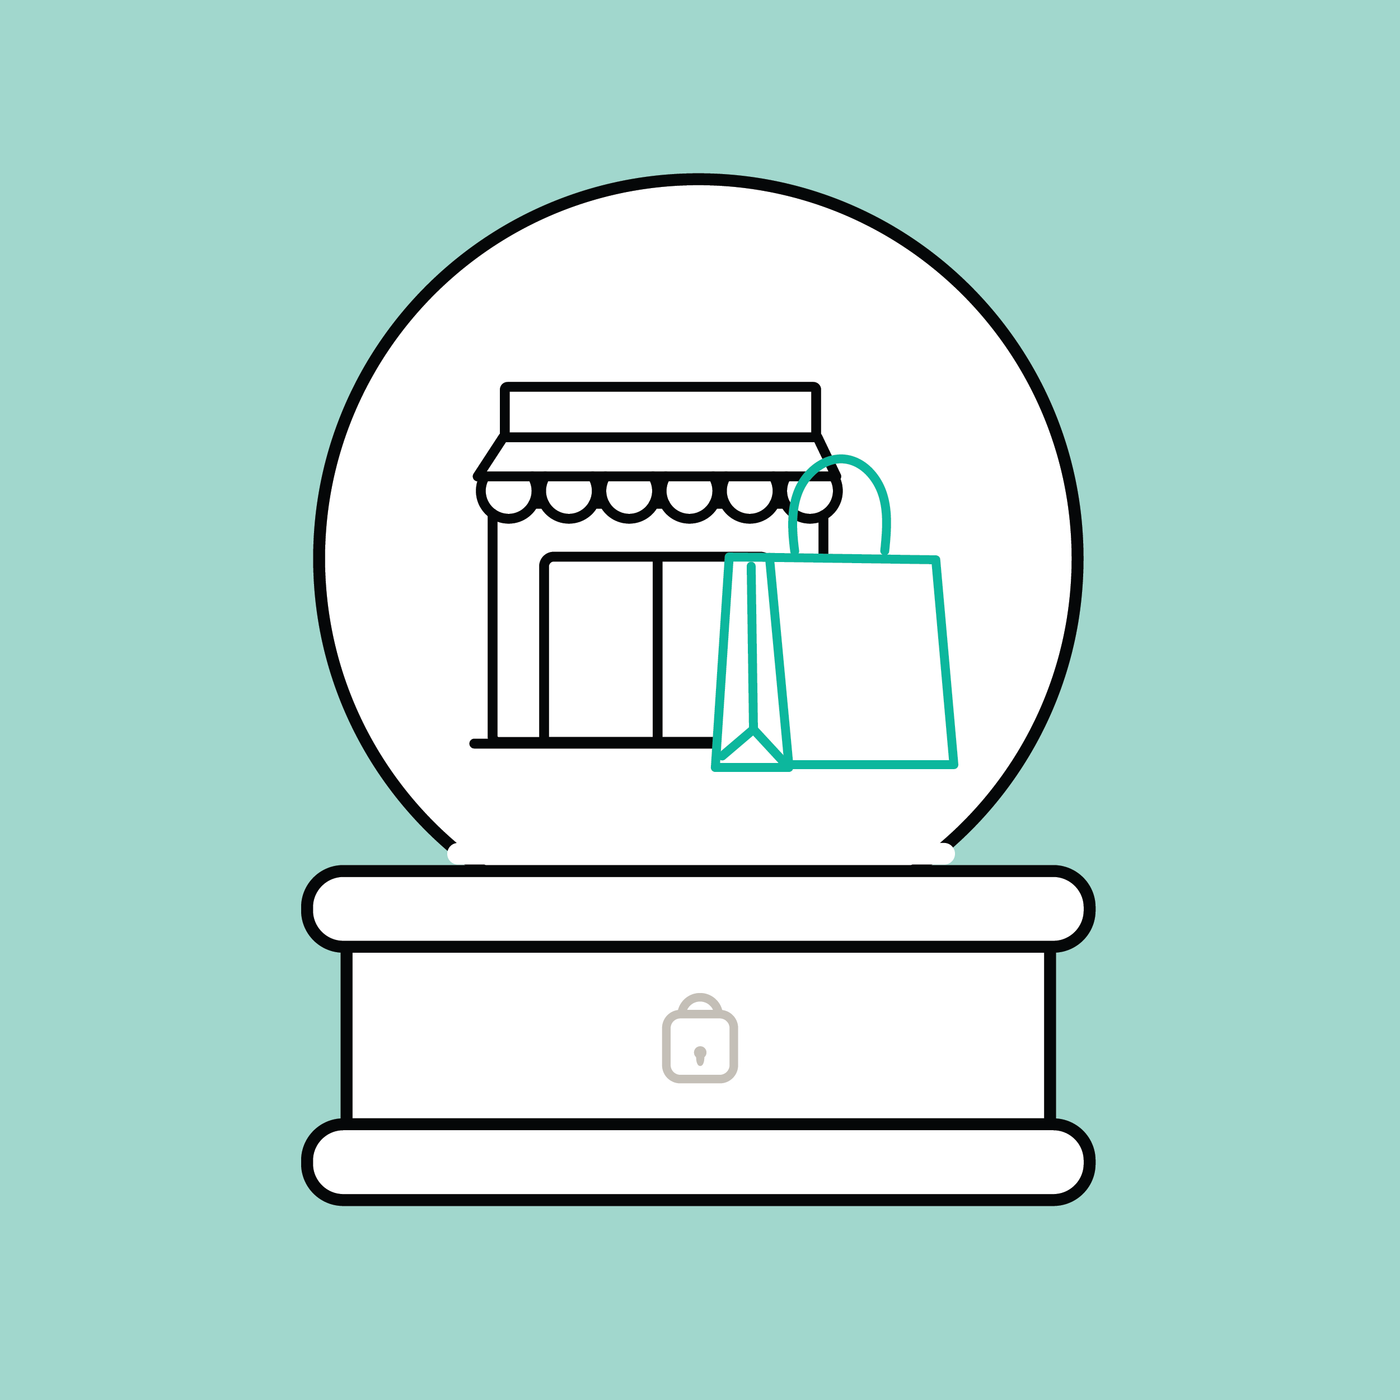 teal background with a snow globe in the center that has a storefront and a shopping bag inside